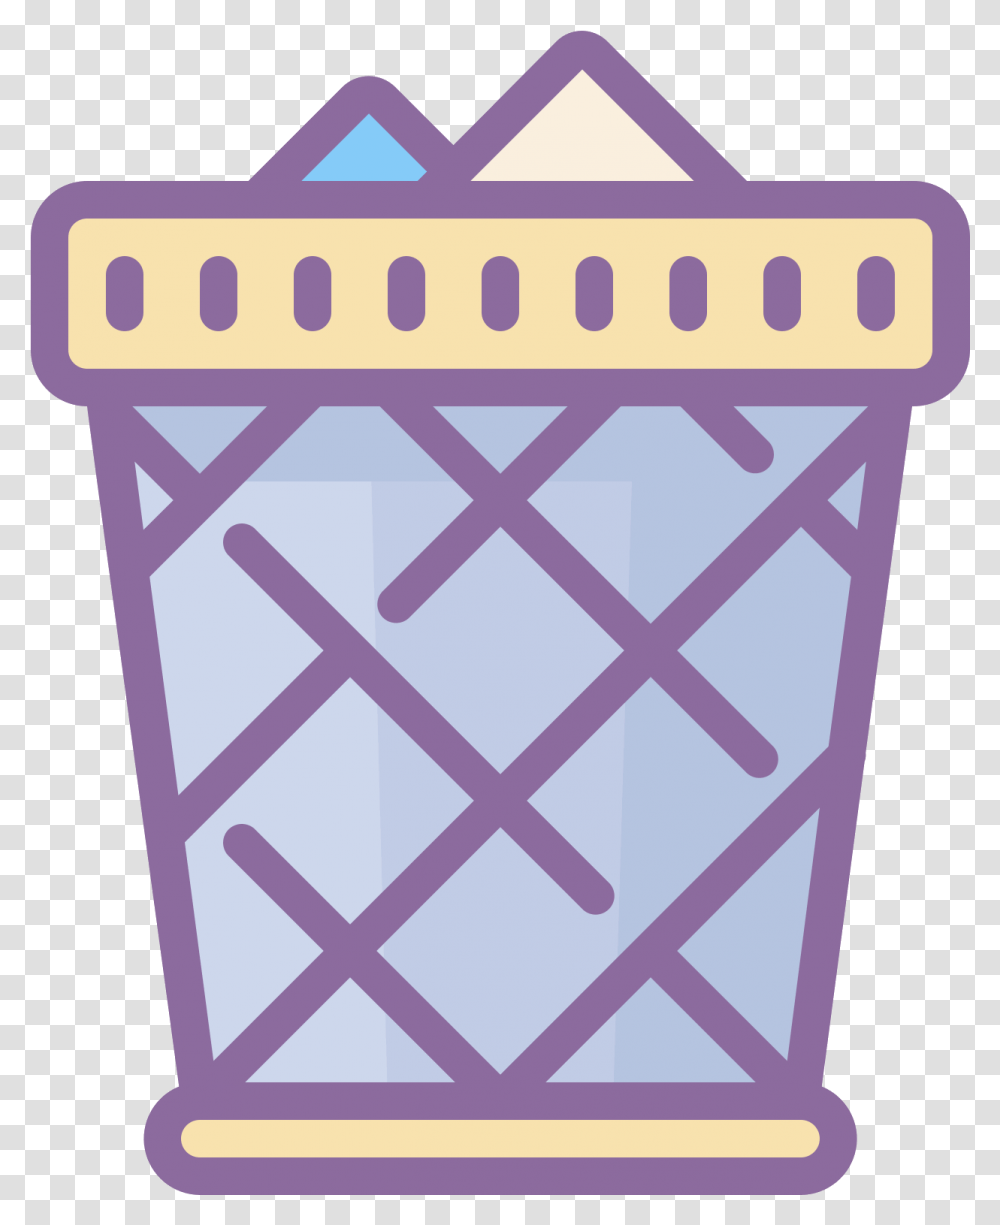 This Icon Is Meant To Represent A Full Trash Can Icon Bin Violet, Word, Sweets, Food Transparent Png